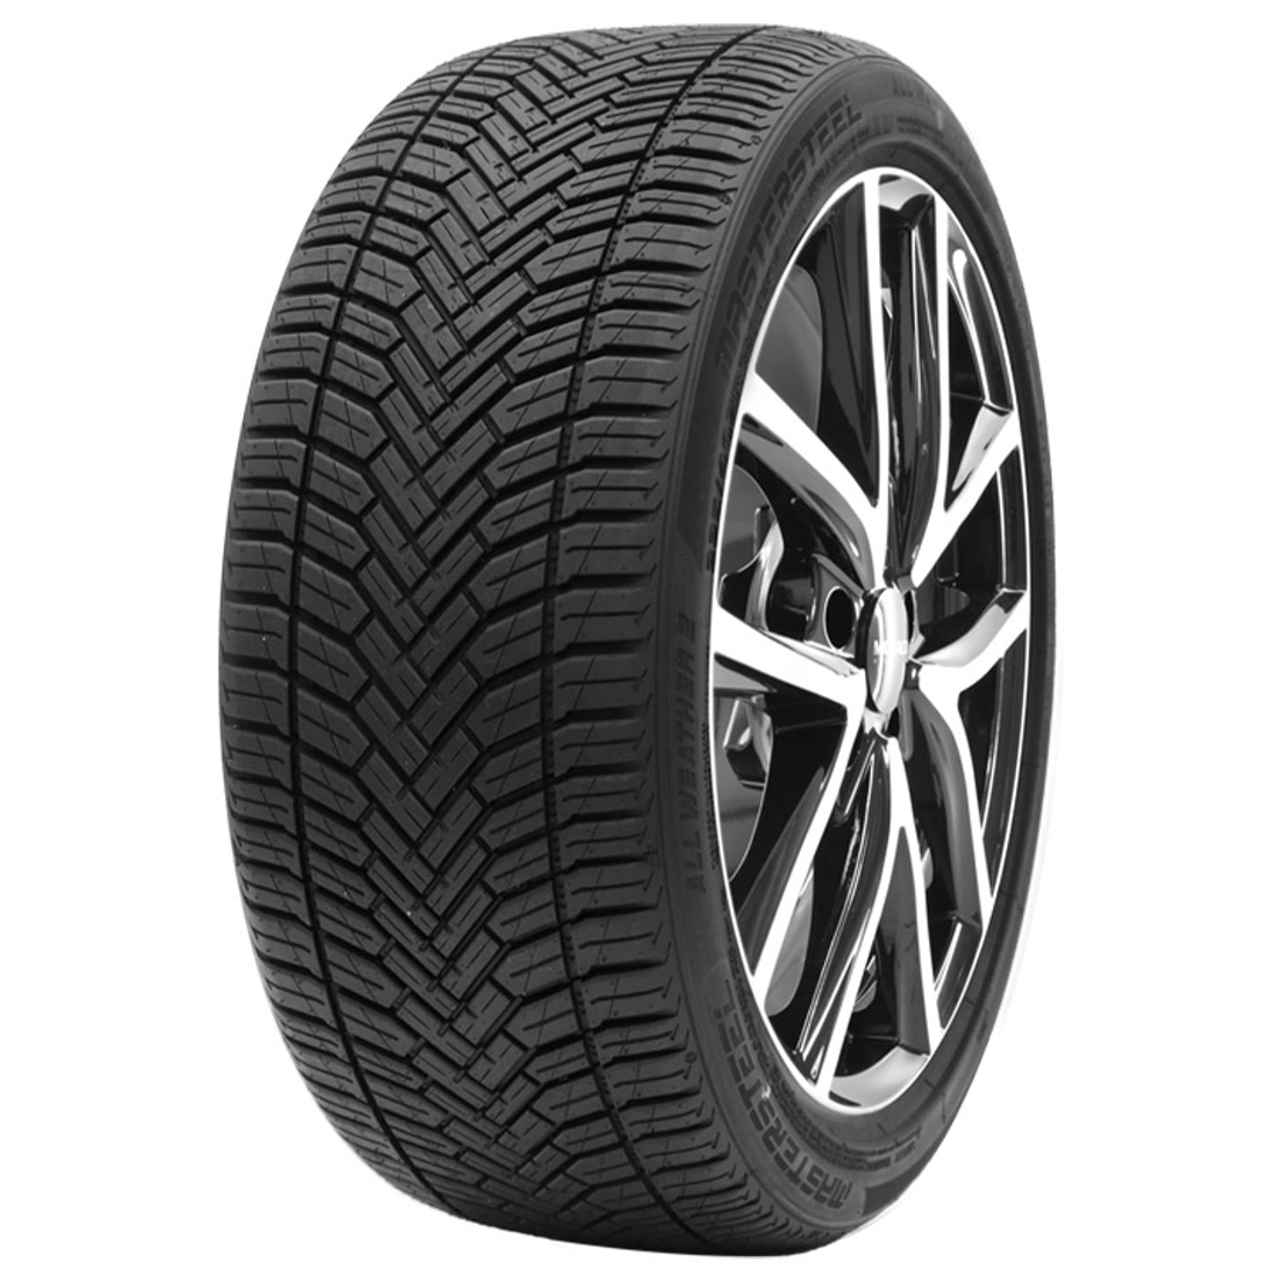 MASTERSTEEL ALL WEATHER 2 195/60R15 88H BSW